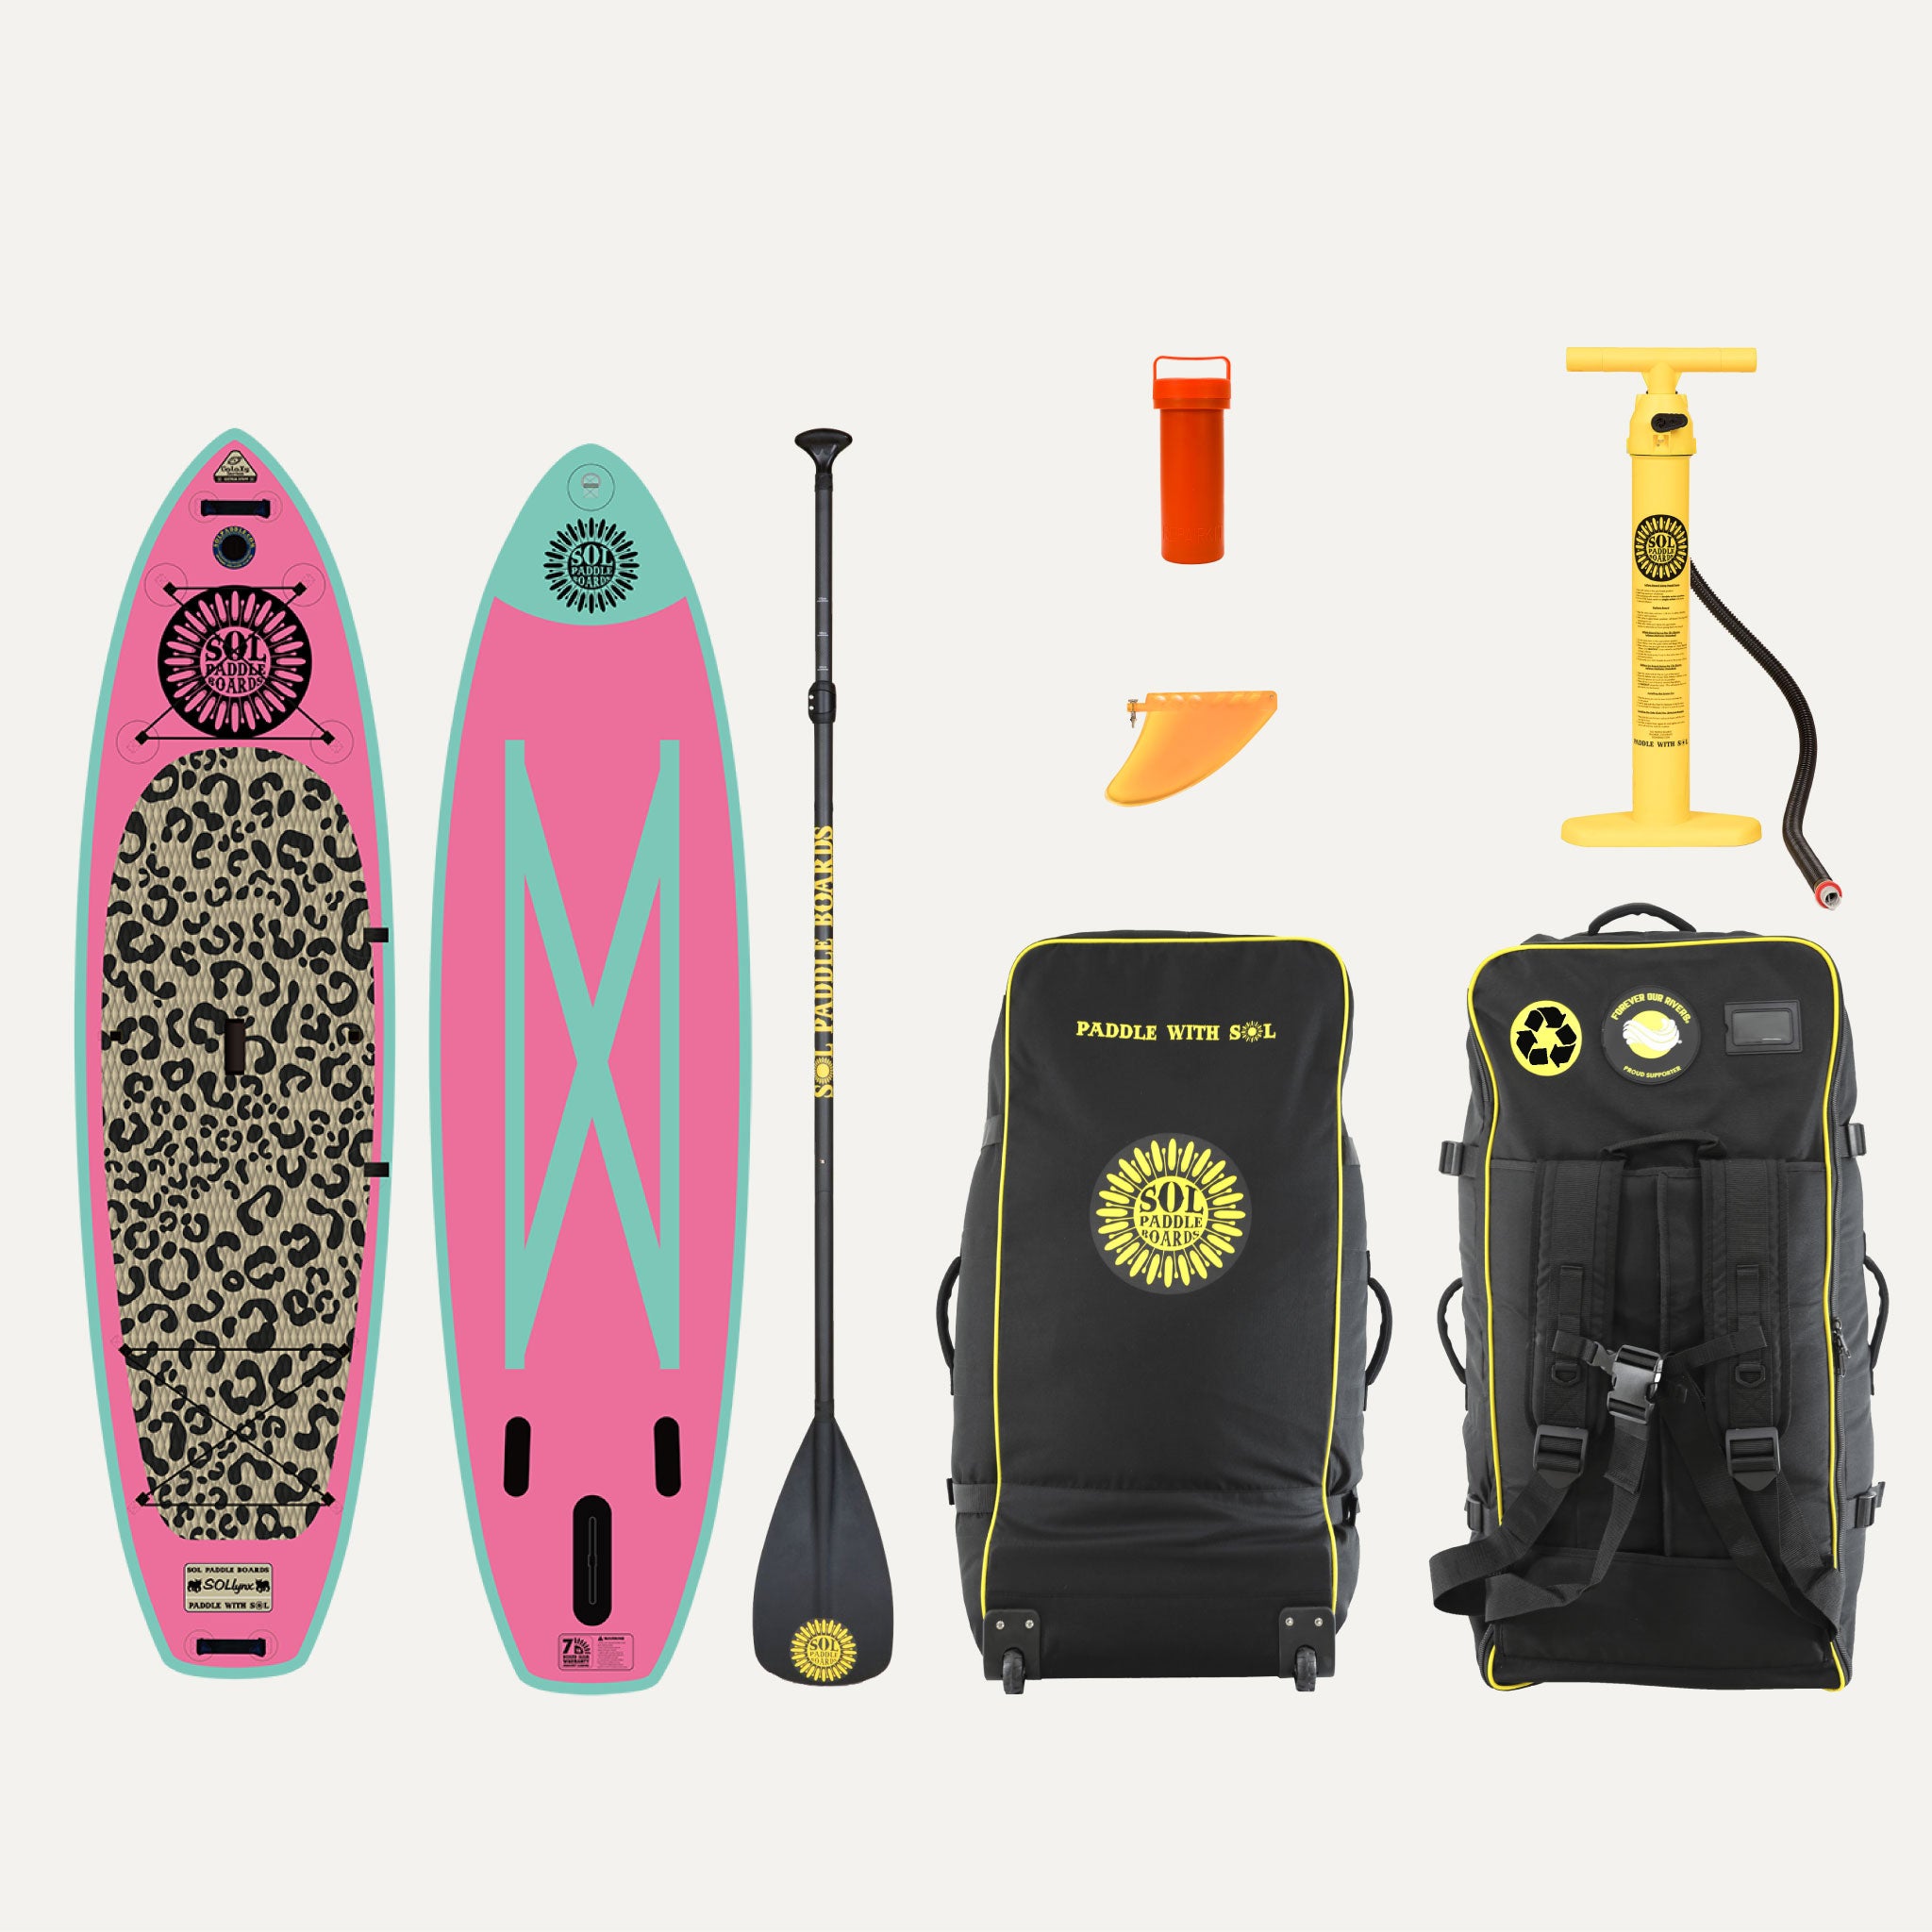 GalaXy SOLlynx Inflatable Paddle Board showcasing  the top and bottom views of the SUP board and the accessories that come with it